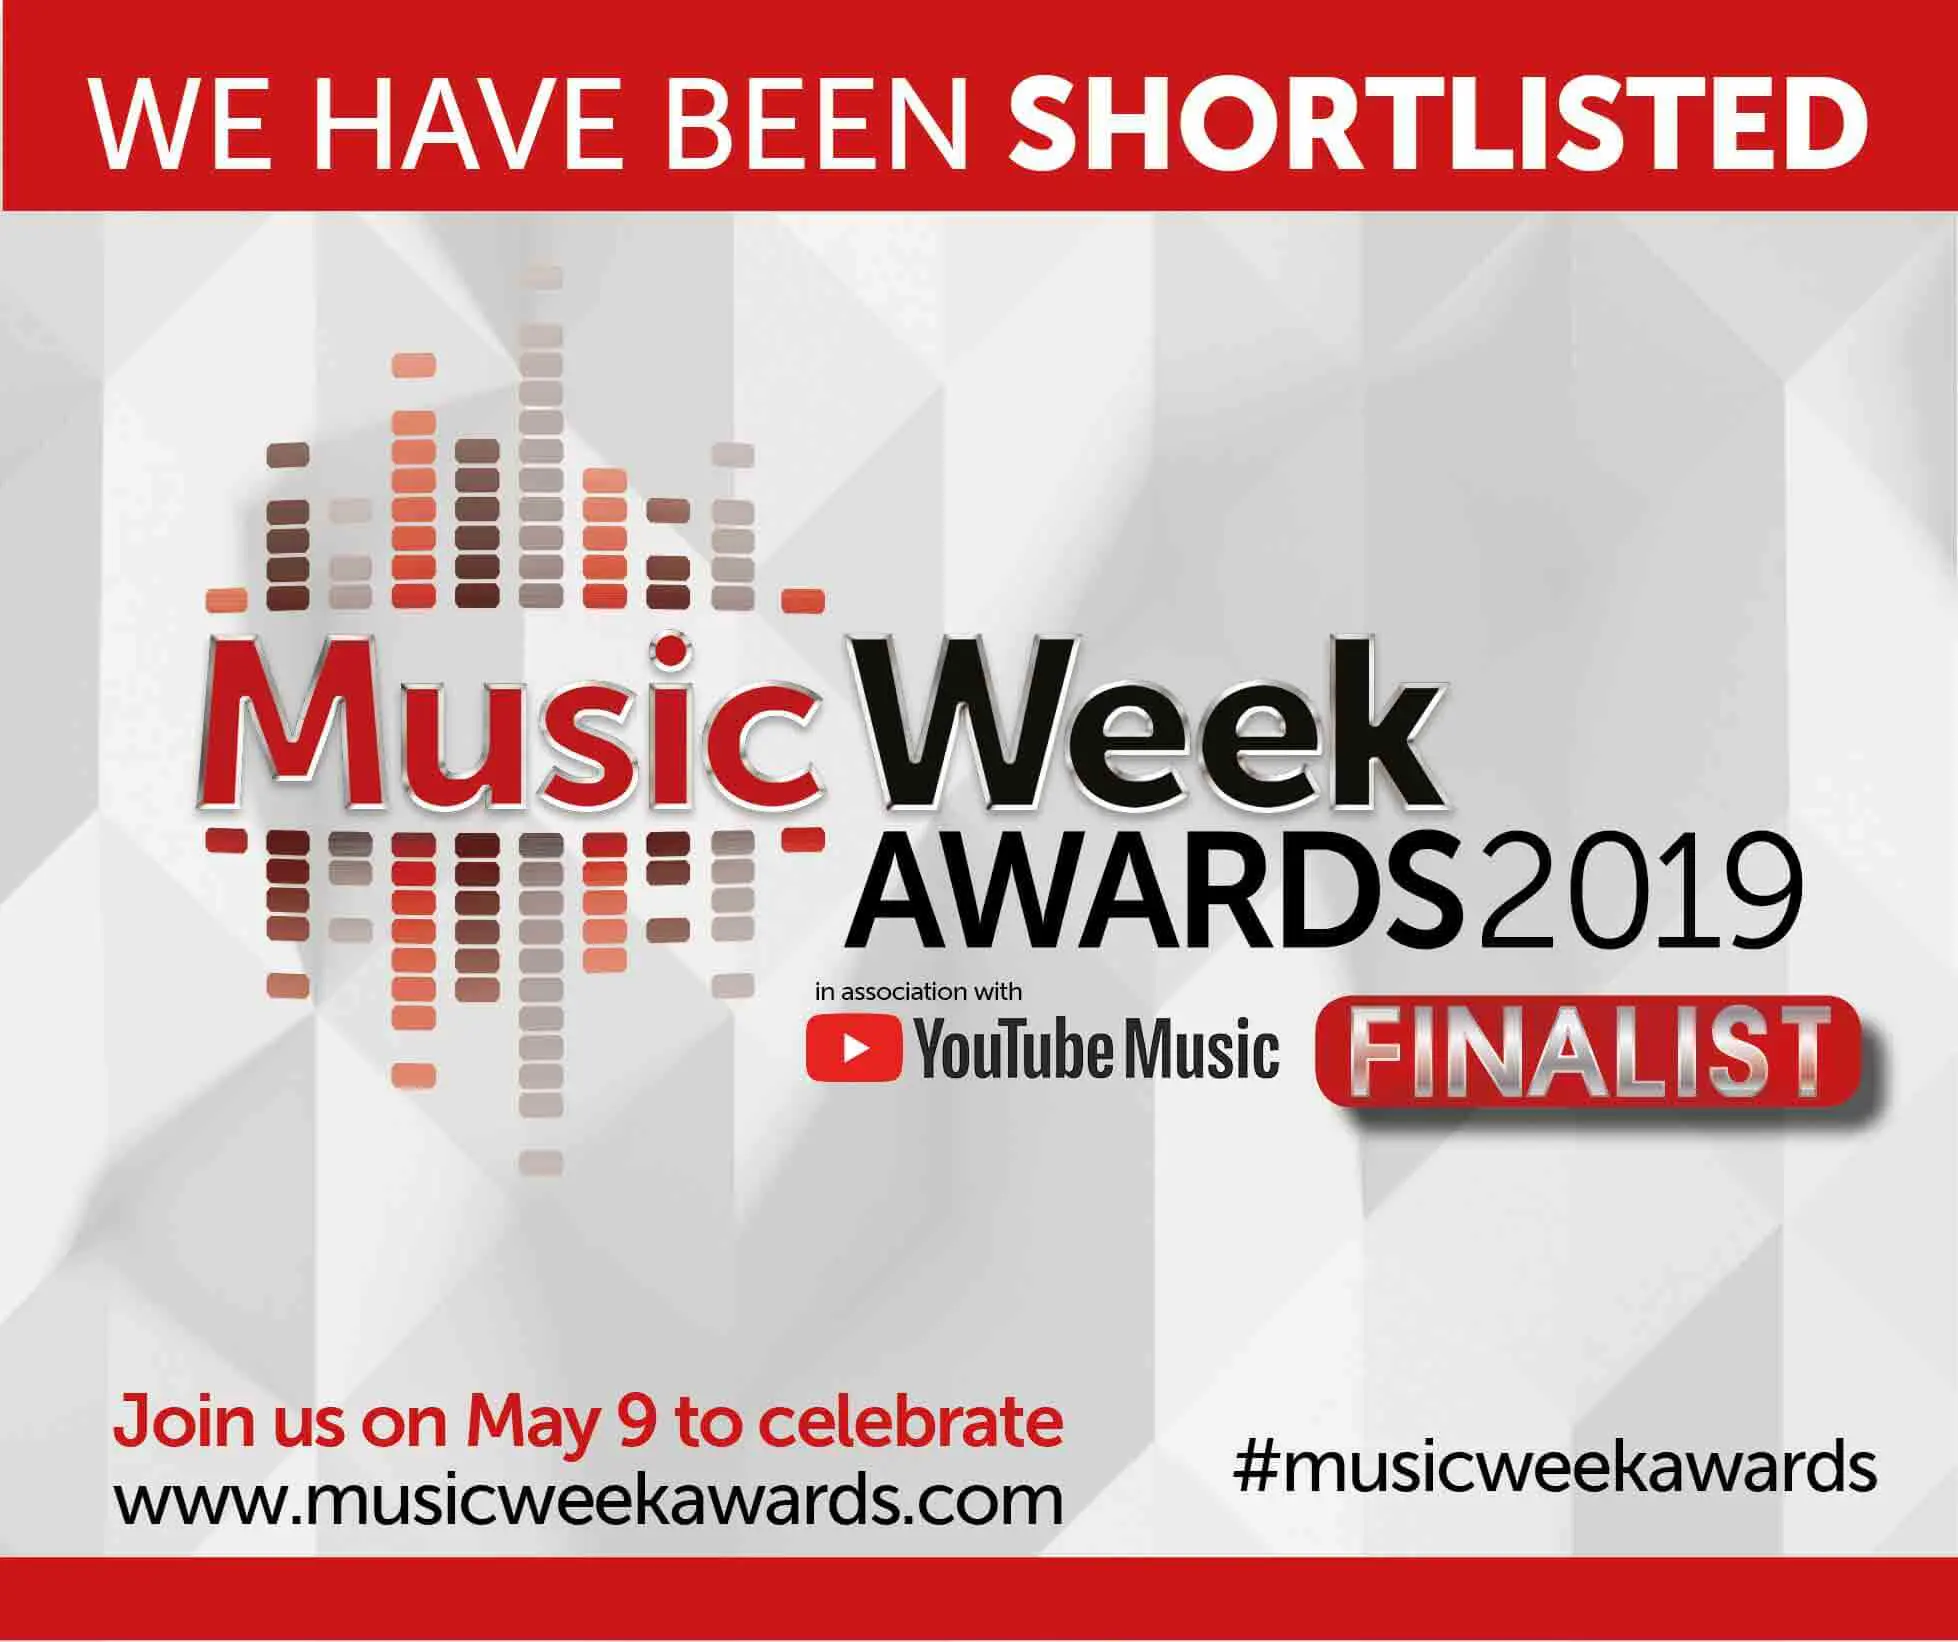 Hamlins shortlisted for Law Firm Of The Year at the Music Week Awards 2019